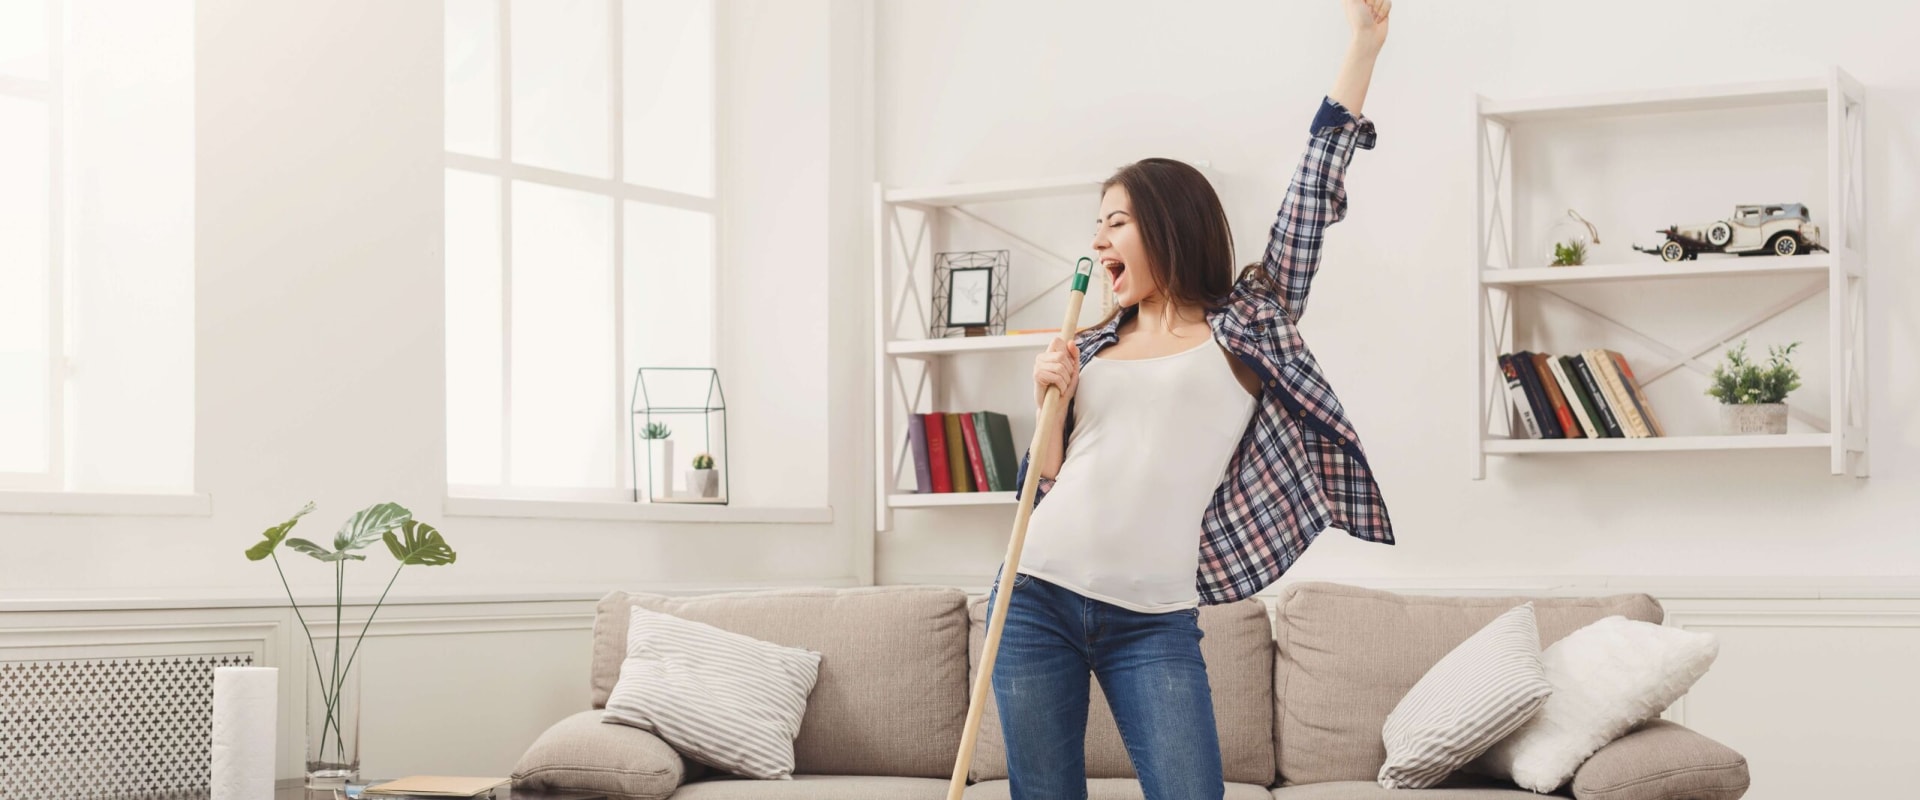 Home Cleaning Tips for a Sparkling and Organized Home